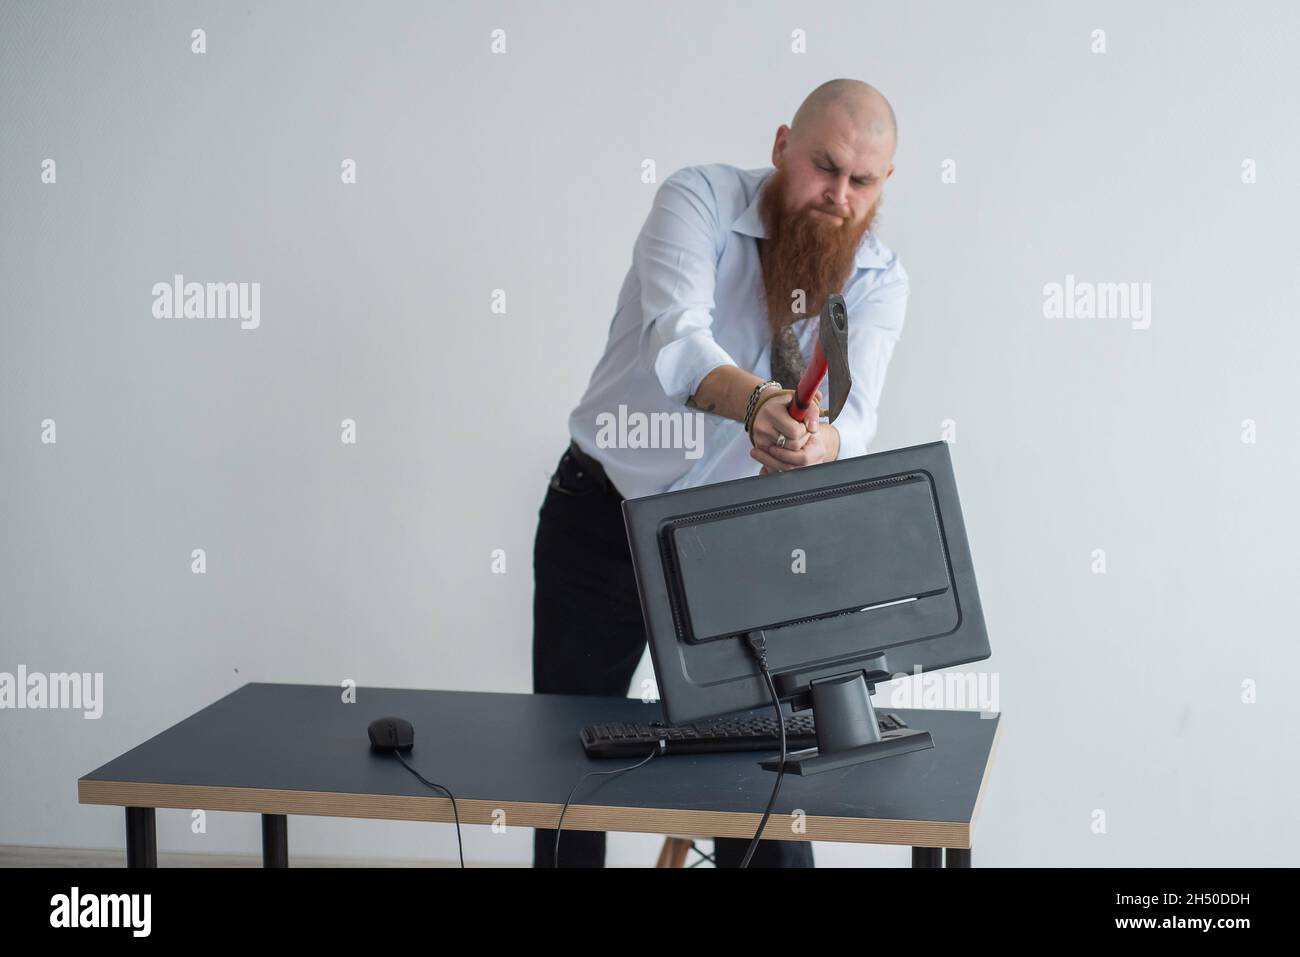 Angry bald man with a red beard in the office in a business suit smashes an ax with a computer. The manager, focused with a nervous breakdown, breaks Stock Photo